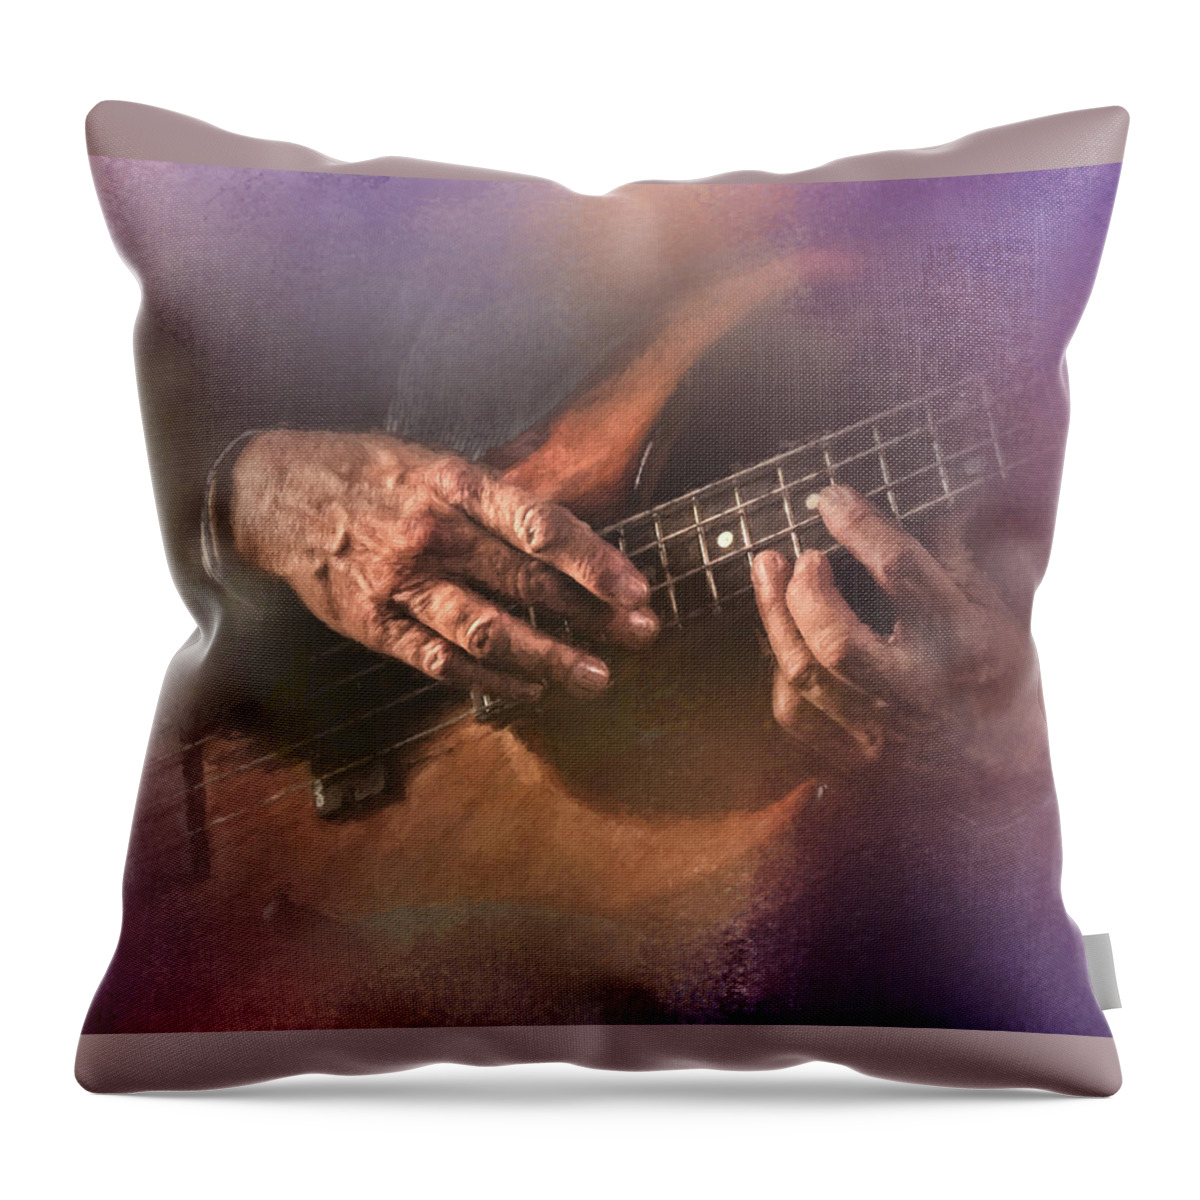 Bass Throw Pillow featuring the photograph Play Me Some Blues by David and Carol Kelly